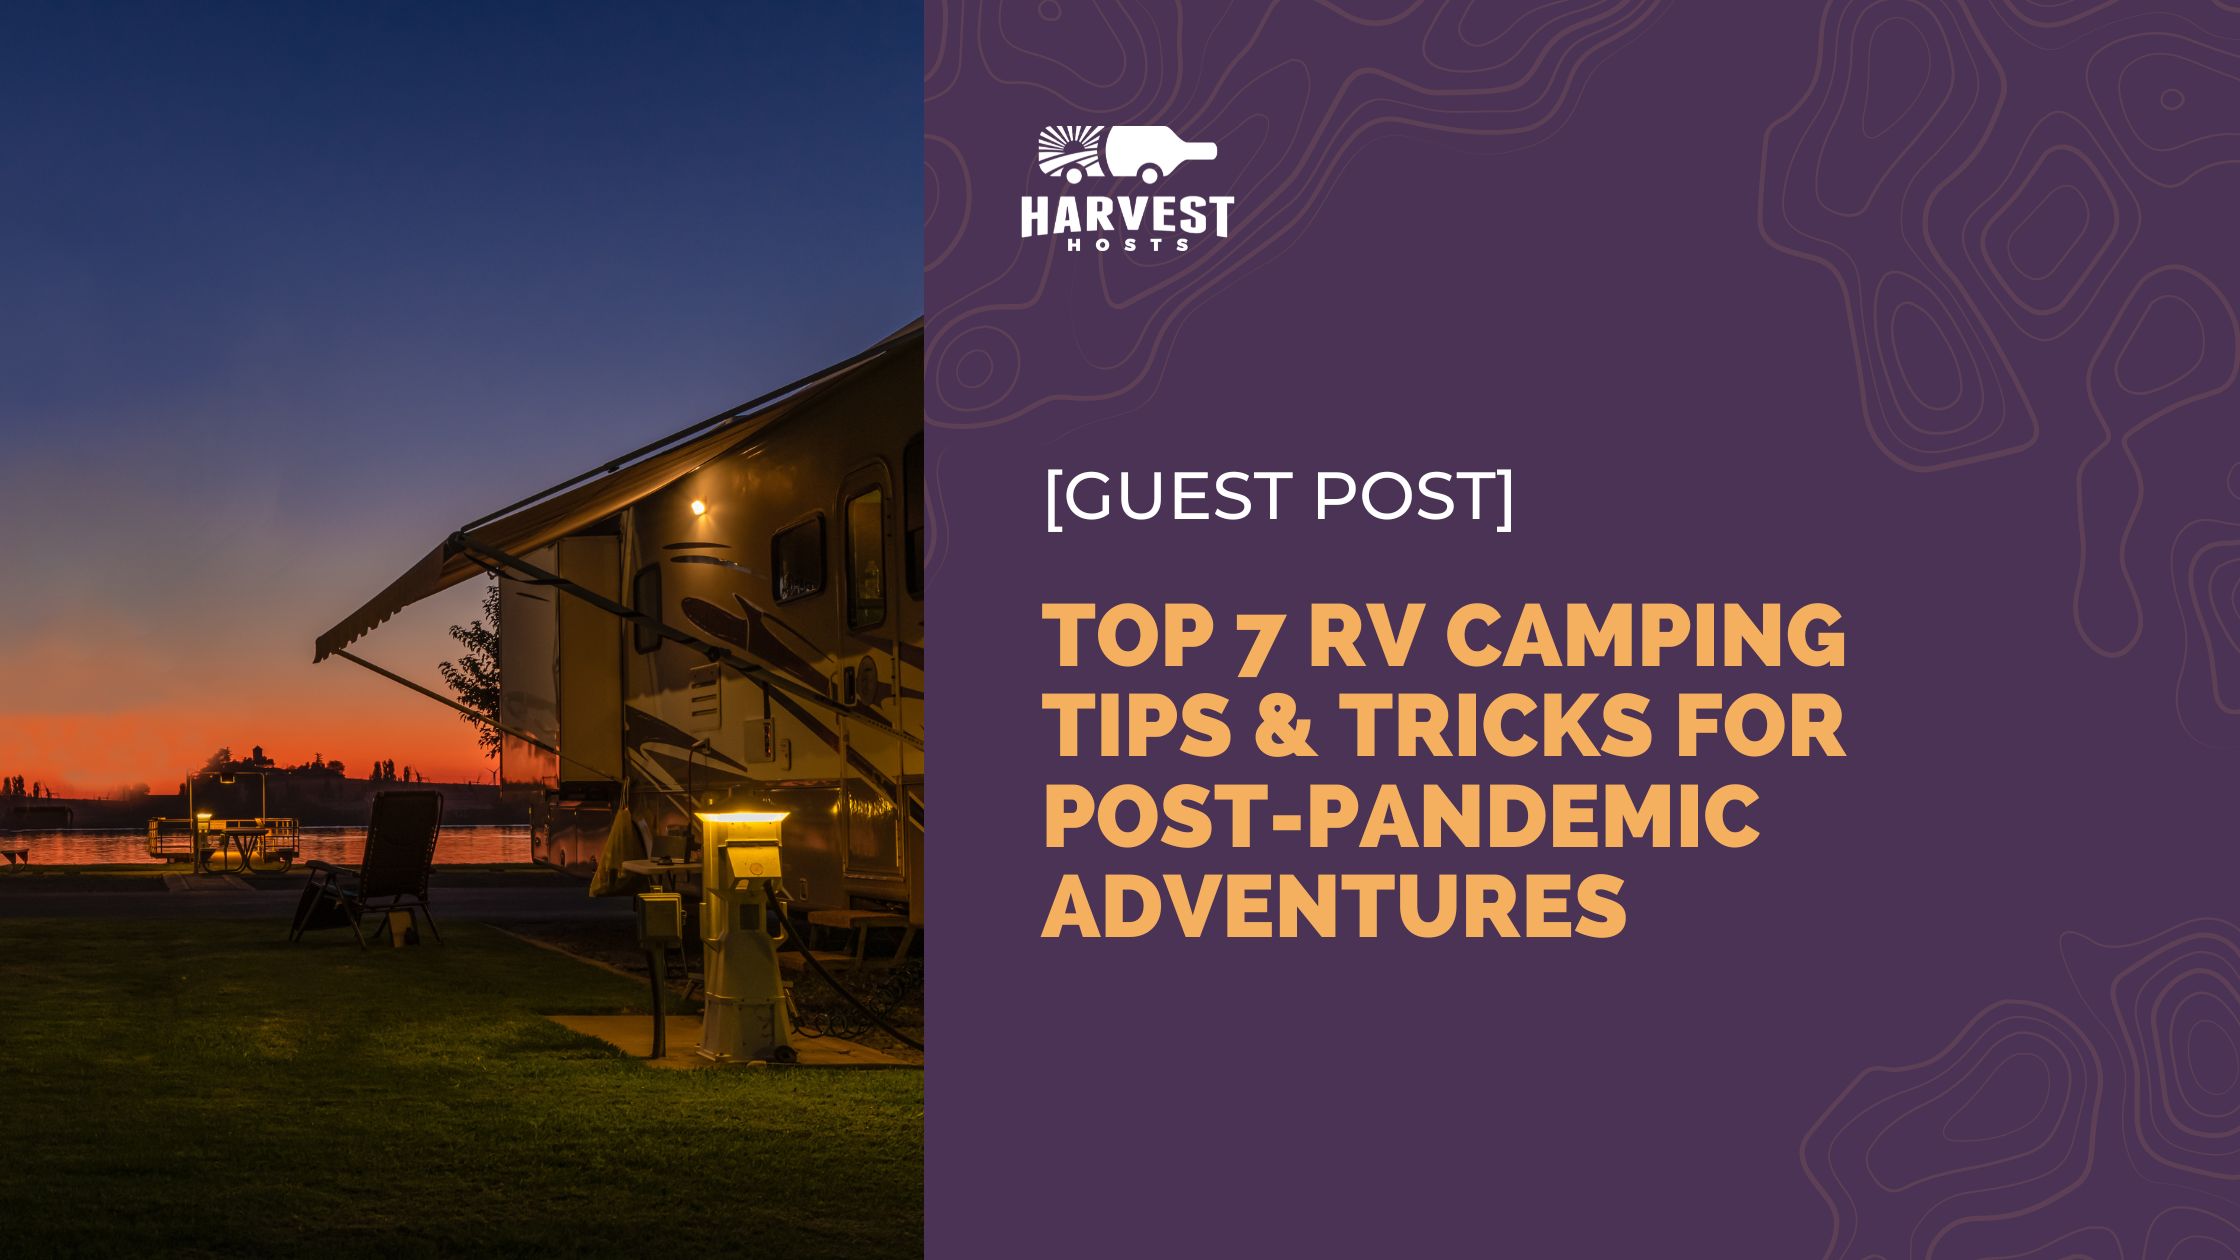 Top 7 RV Camping Tips & Tricks for Post-Pandemic Adventures